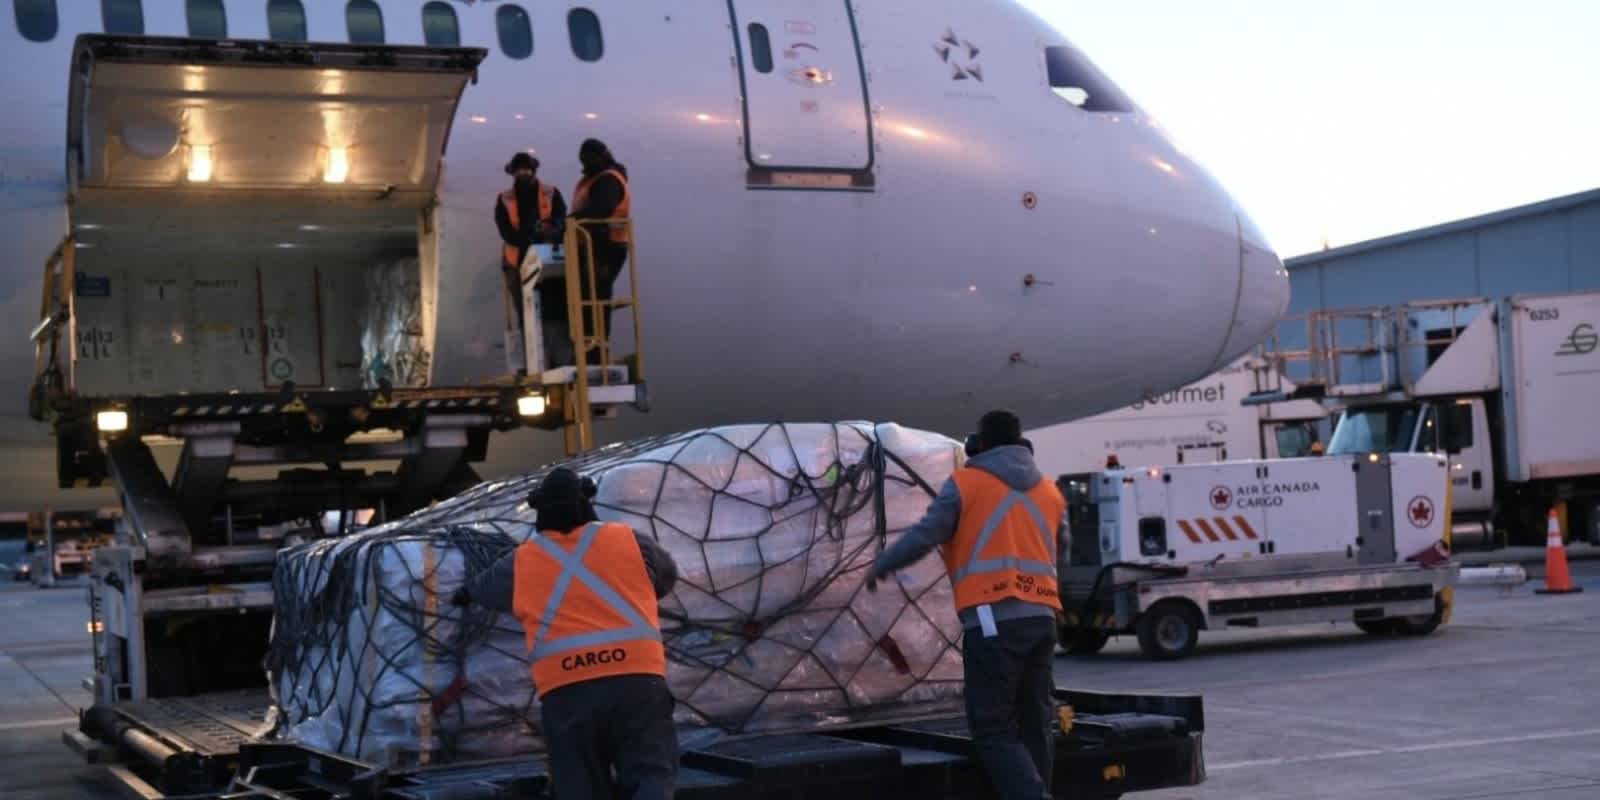 Air Canada Shipment to Warsaw for Ukraine refugees - 2